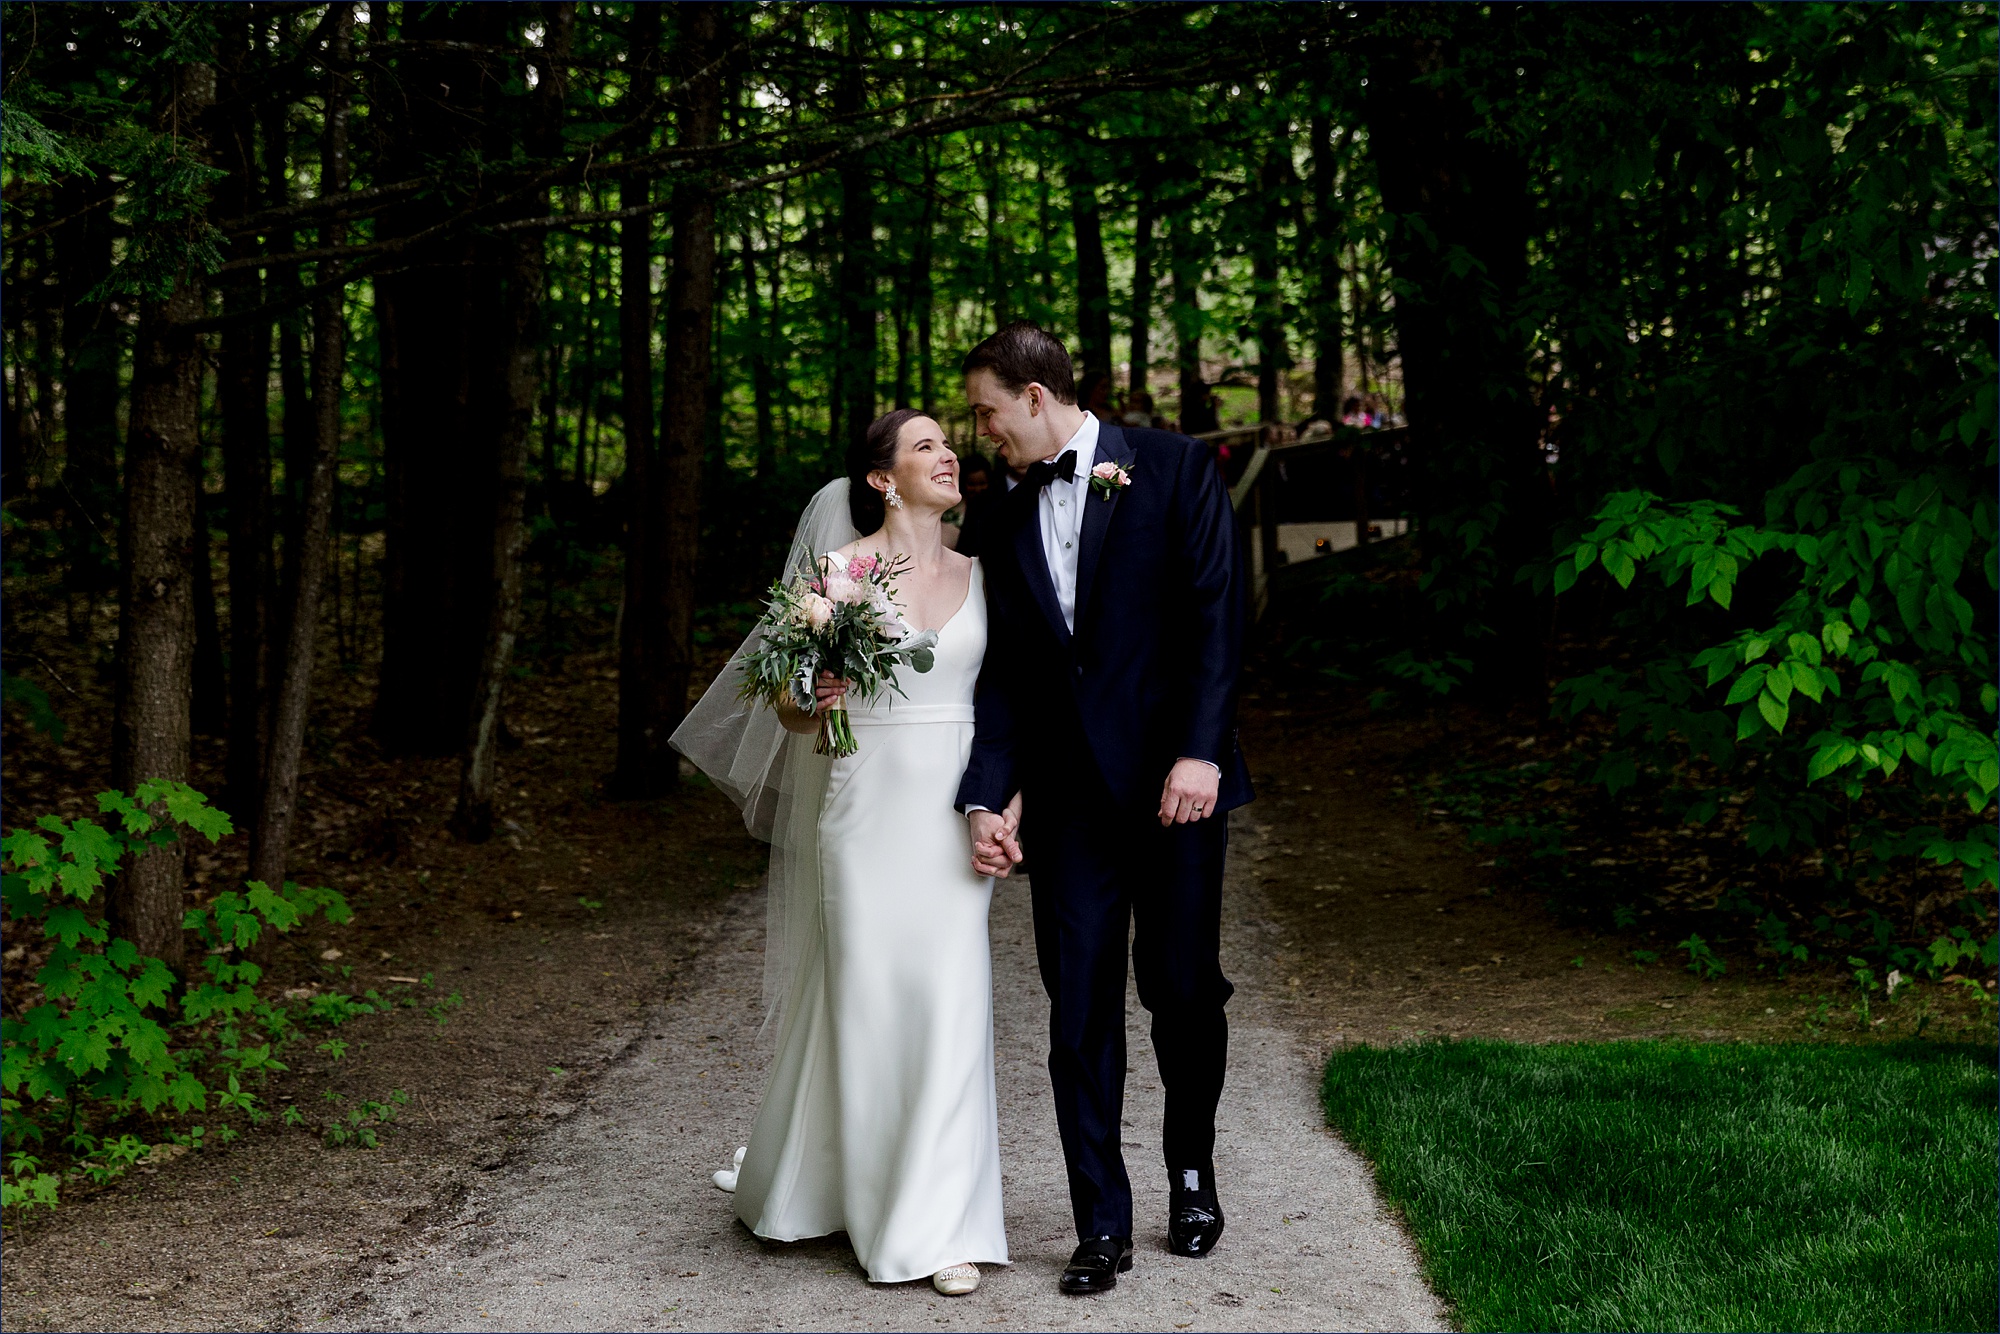 Hardy Farm Wedding where the bride and groom exit the ceremony in the woods with giant smiles